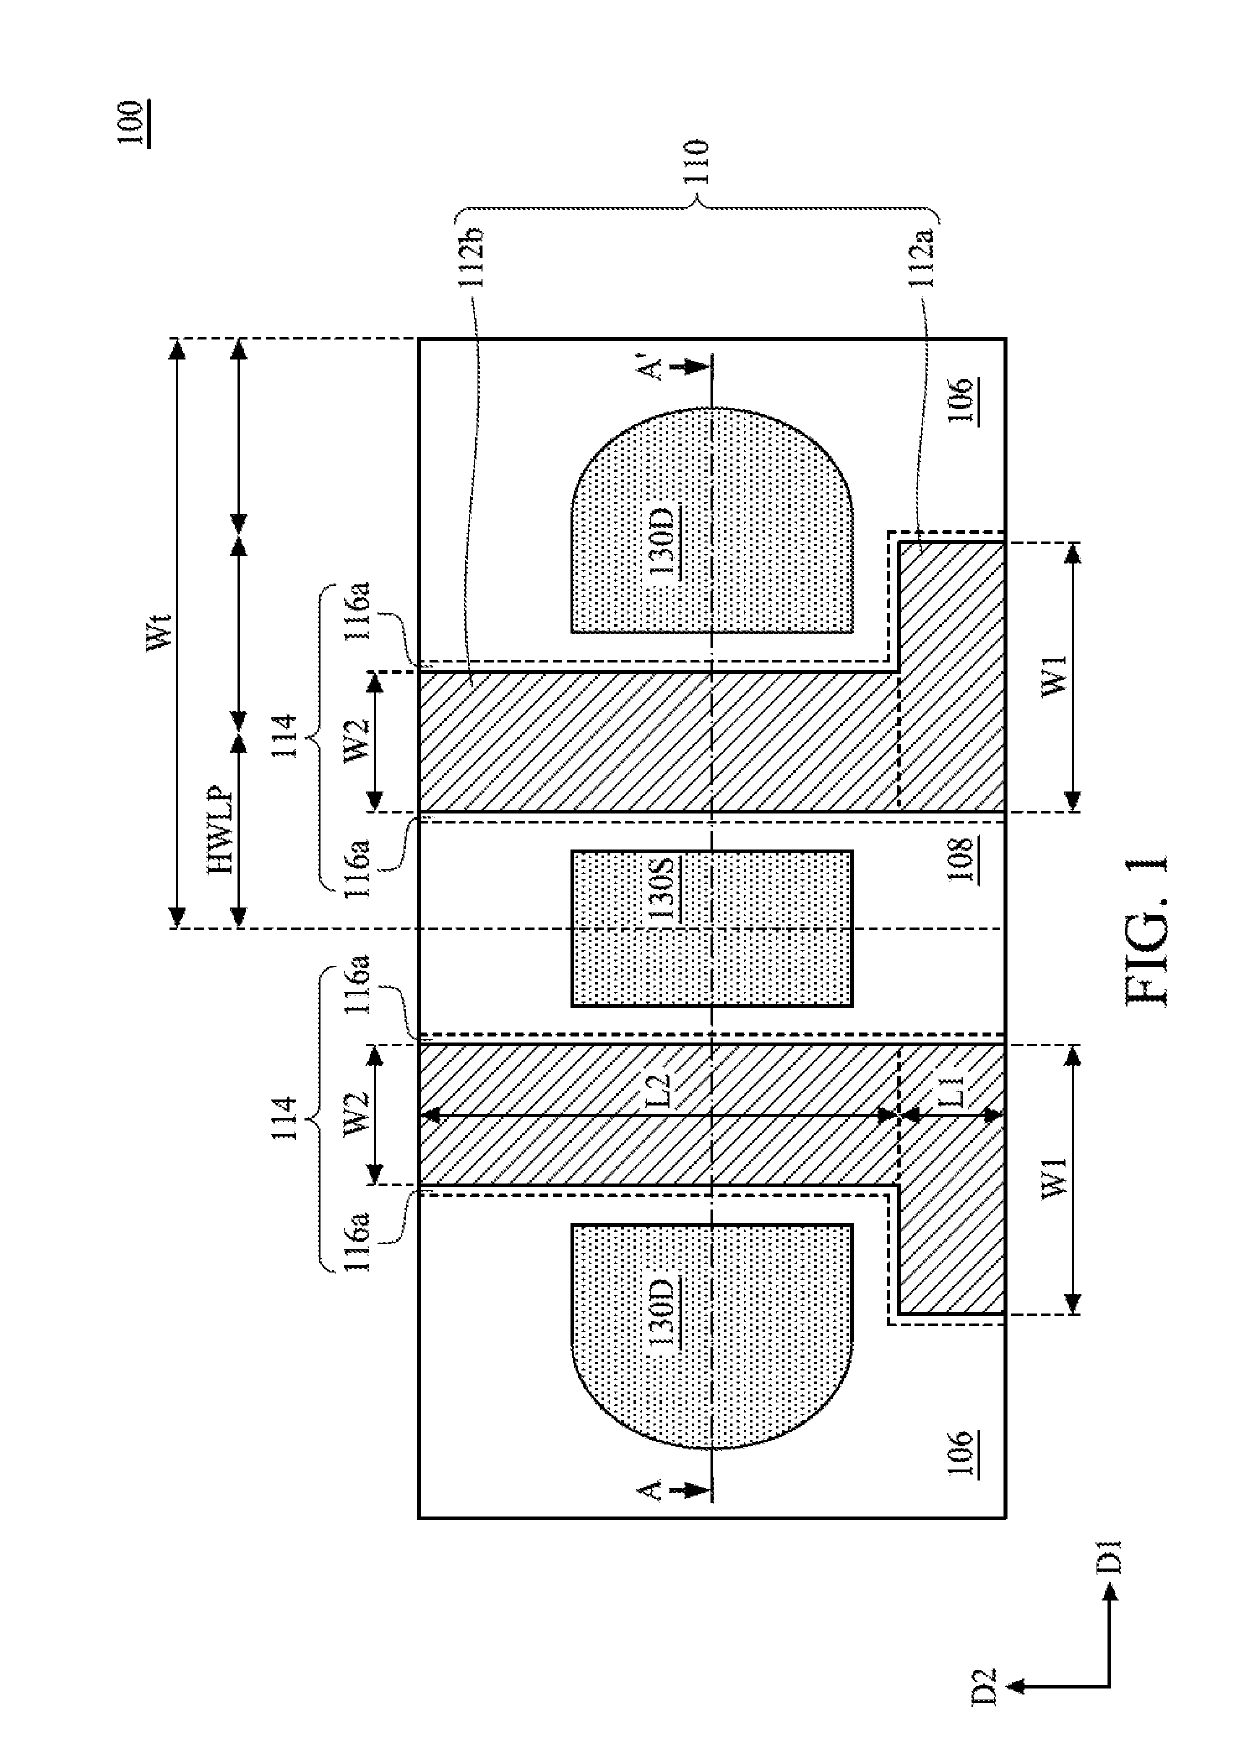 Transistor structure and semiconductor layout structure